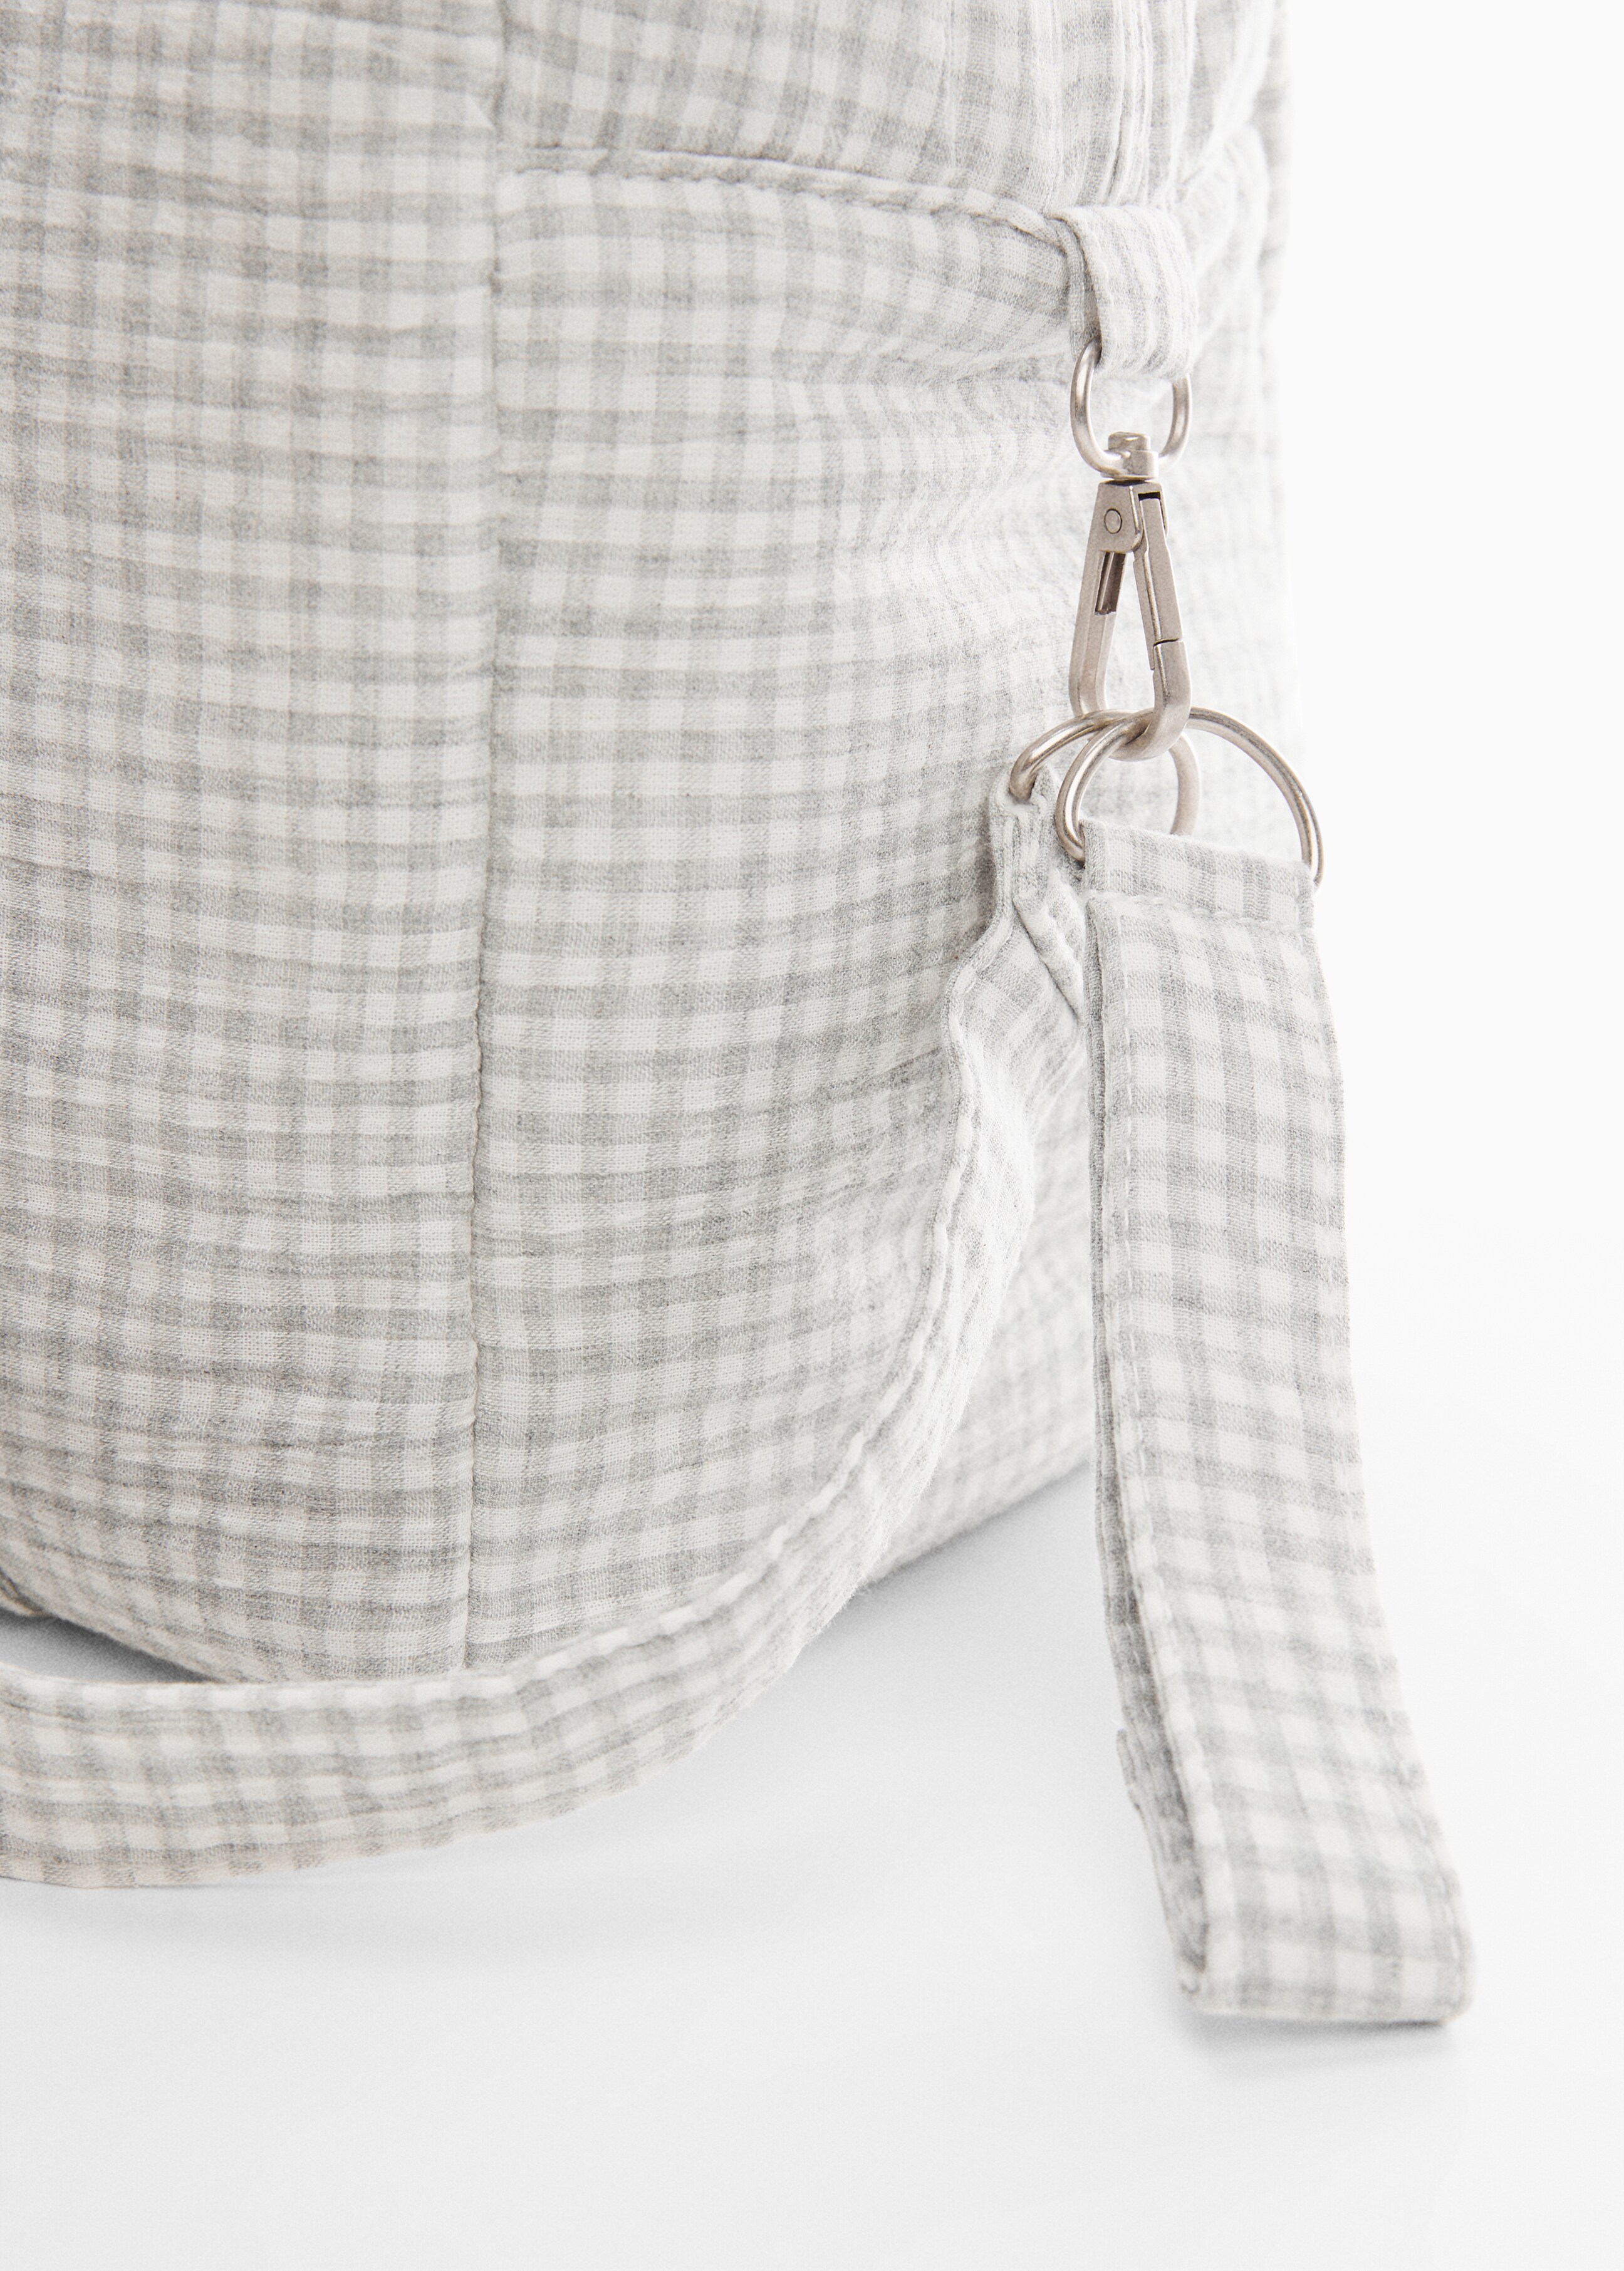 Maternity Bag - Details of the article 1